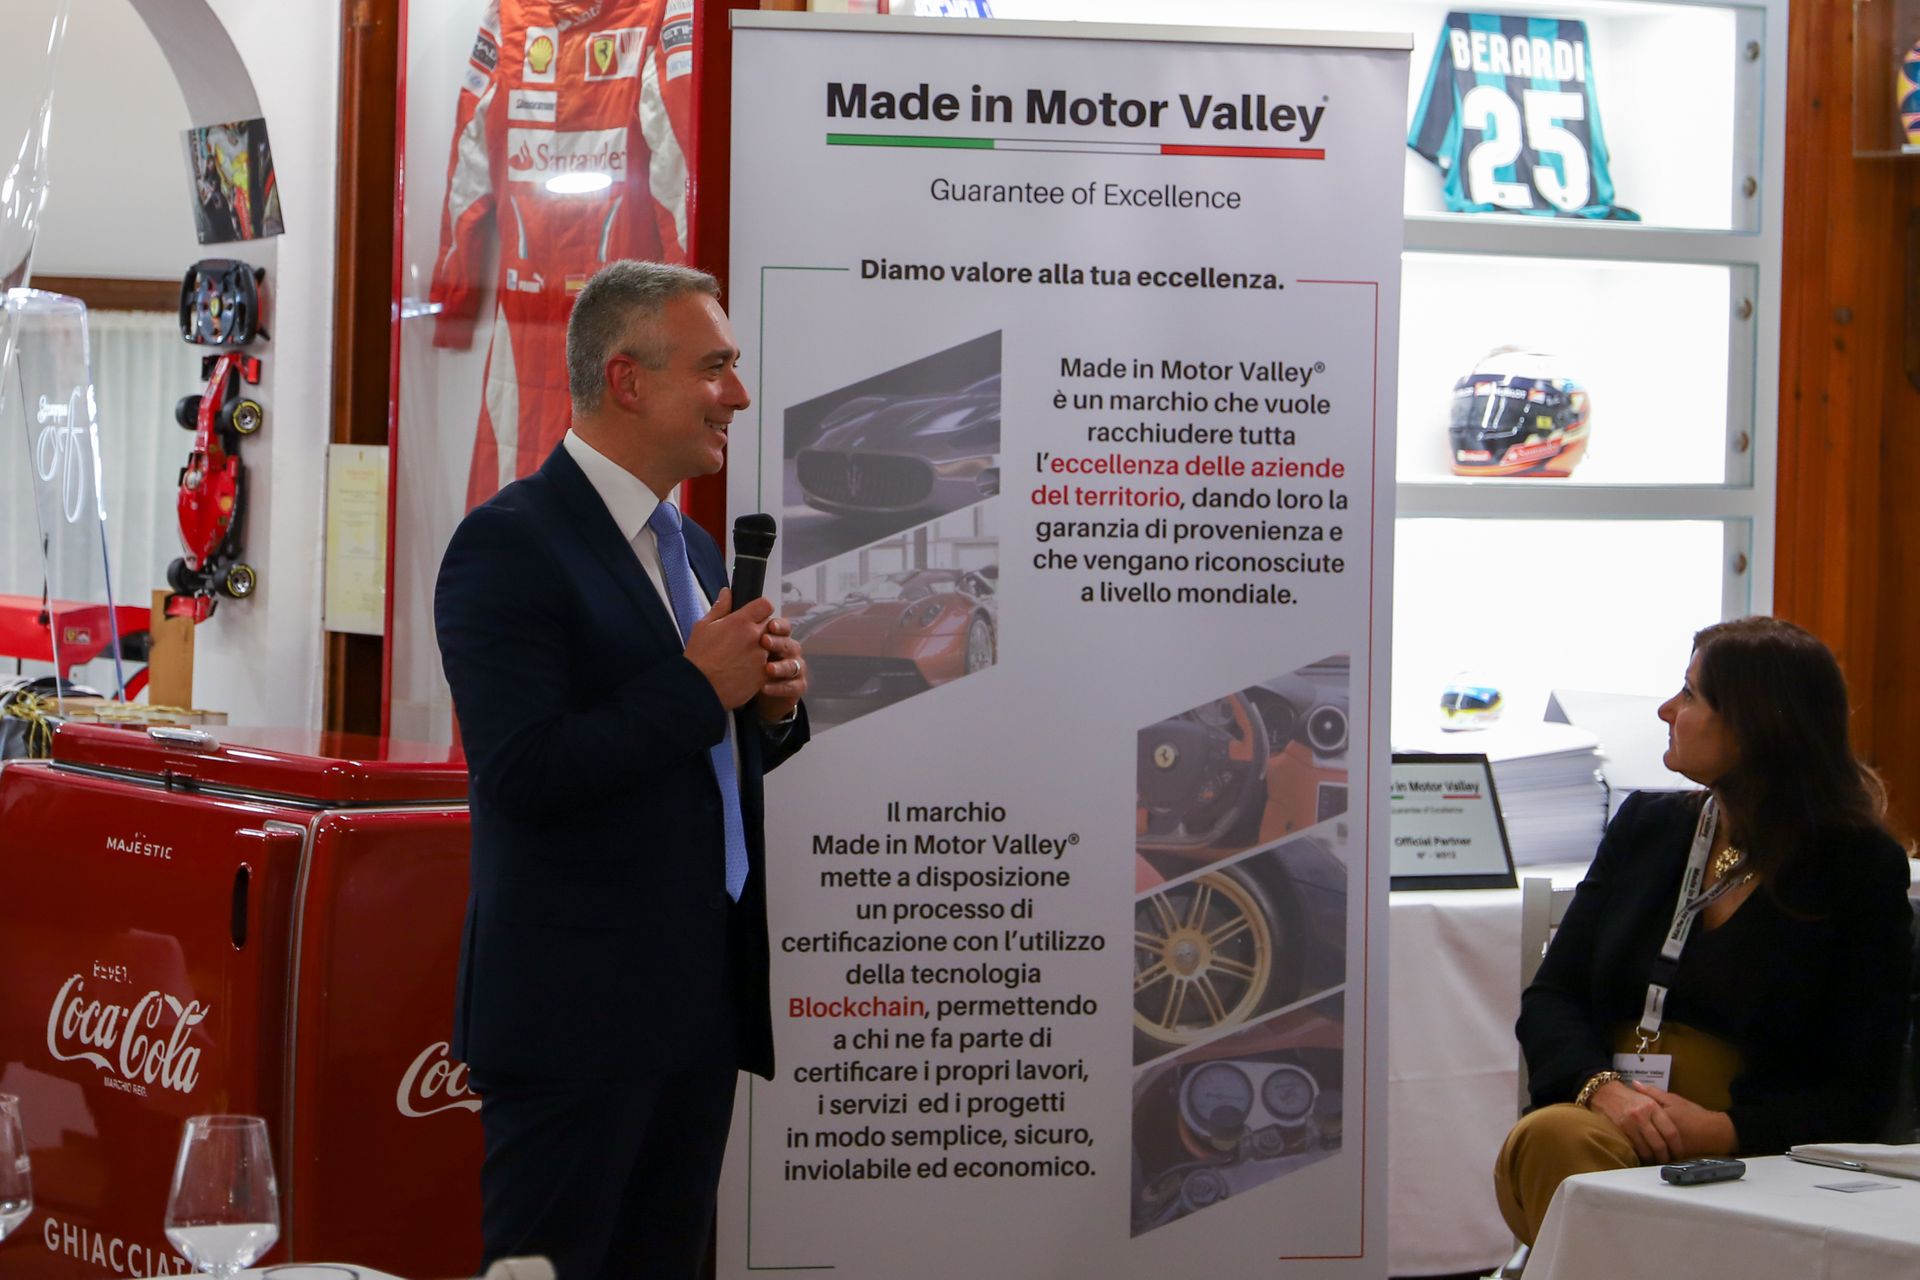 Entrepreneur from Finale Socrate Zizza at the presentation of the "Made in Motor Valley" initiative at Fiorano Modenese